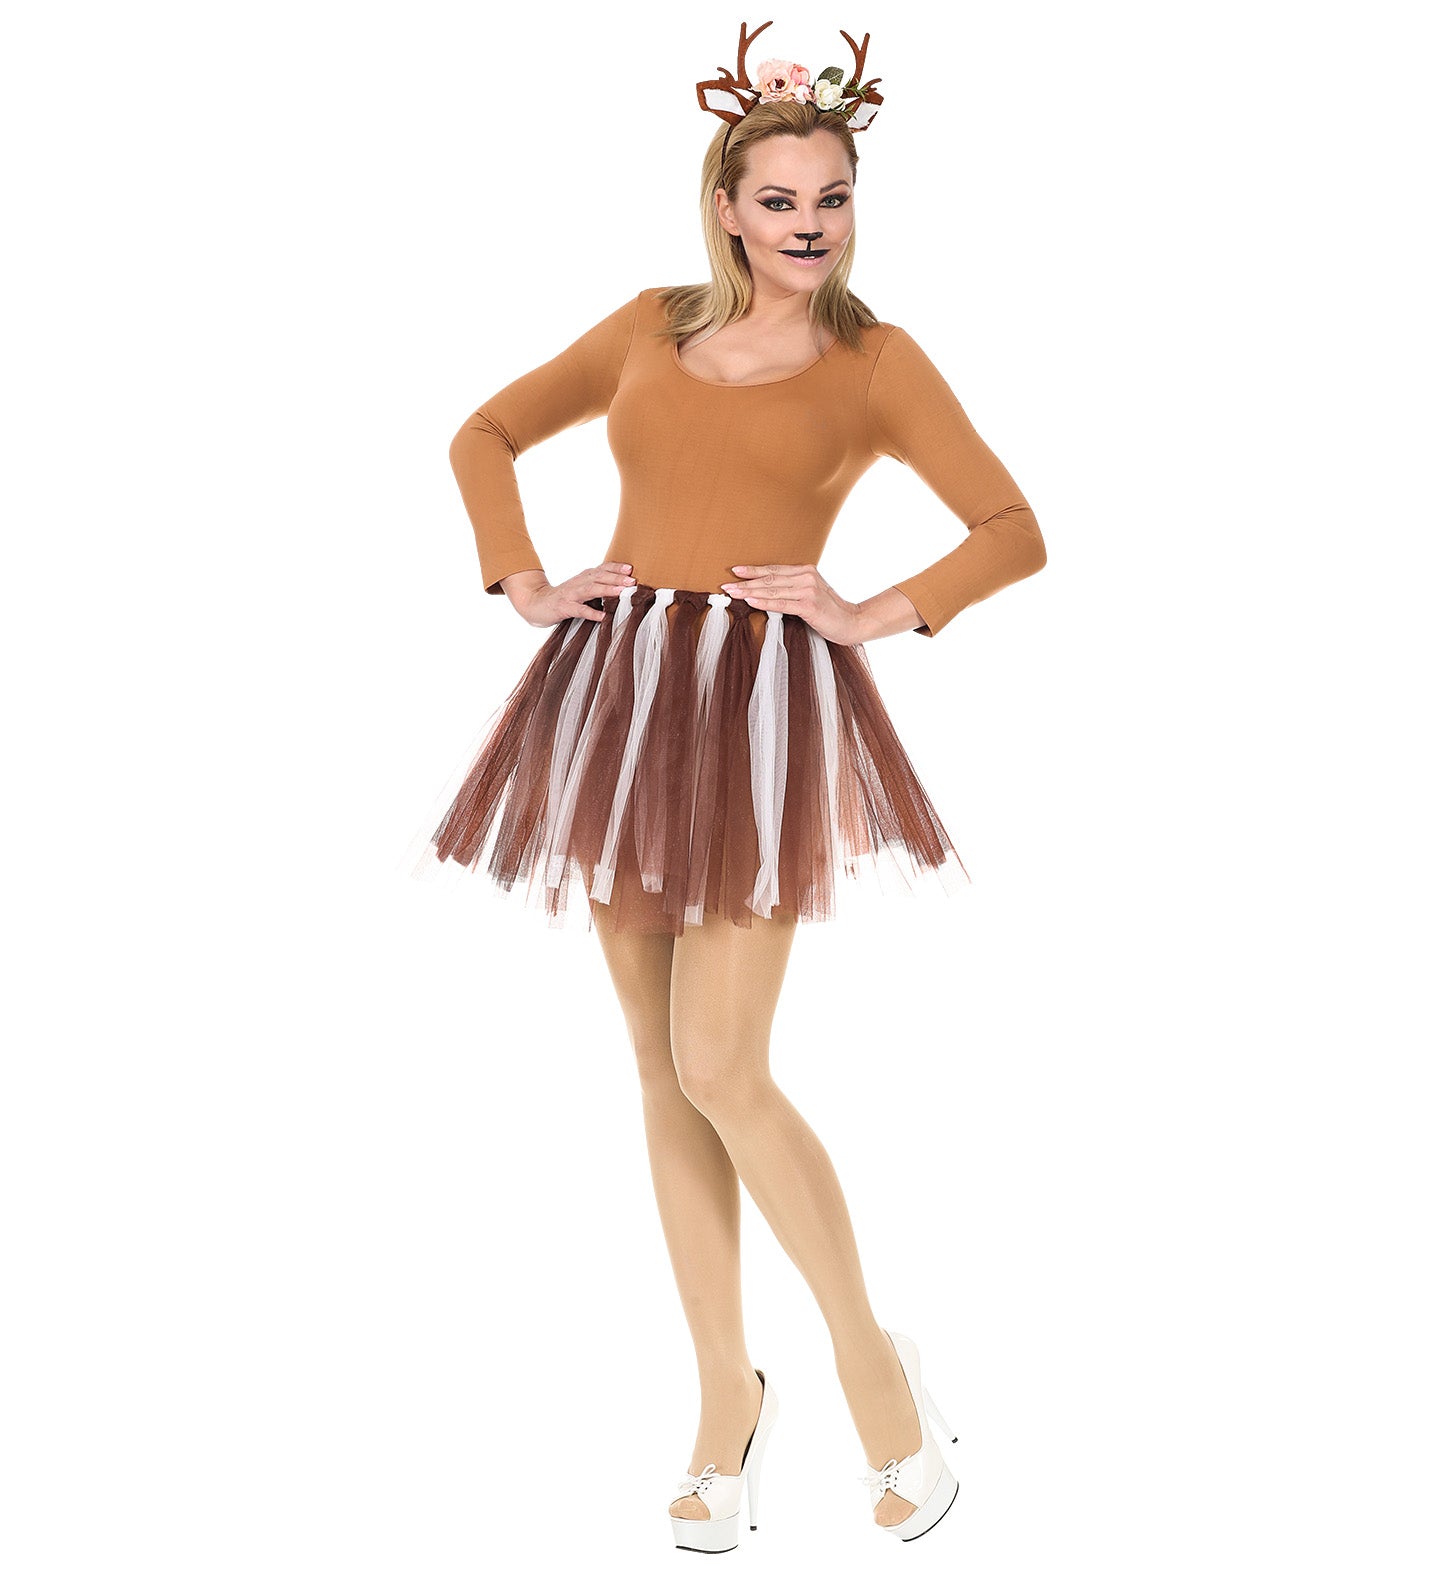 Reindeer Costume accessory Kit with antlers and tutu